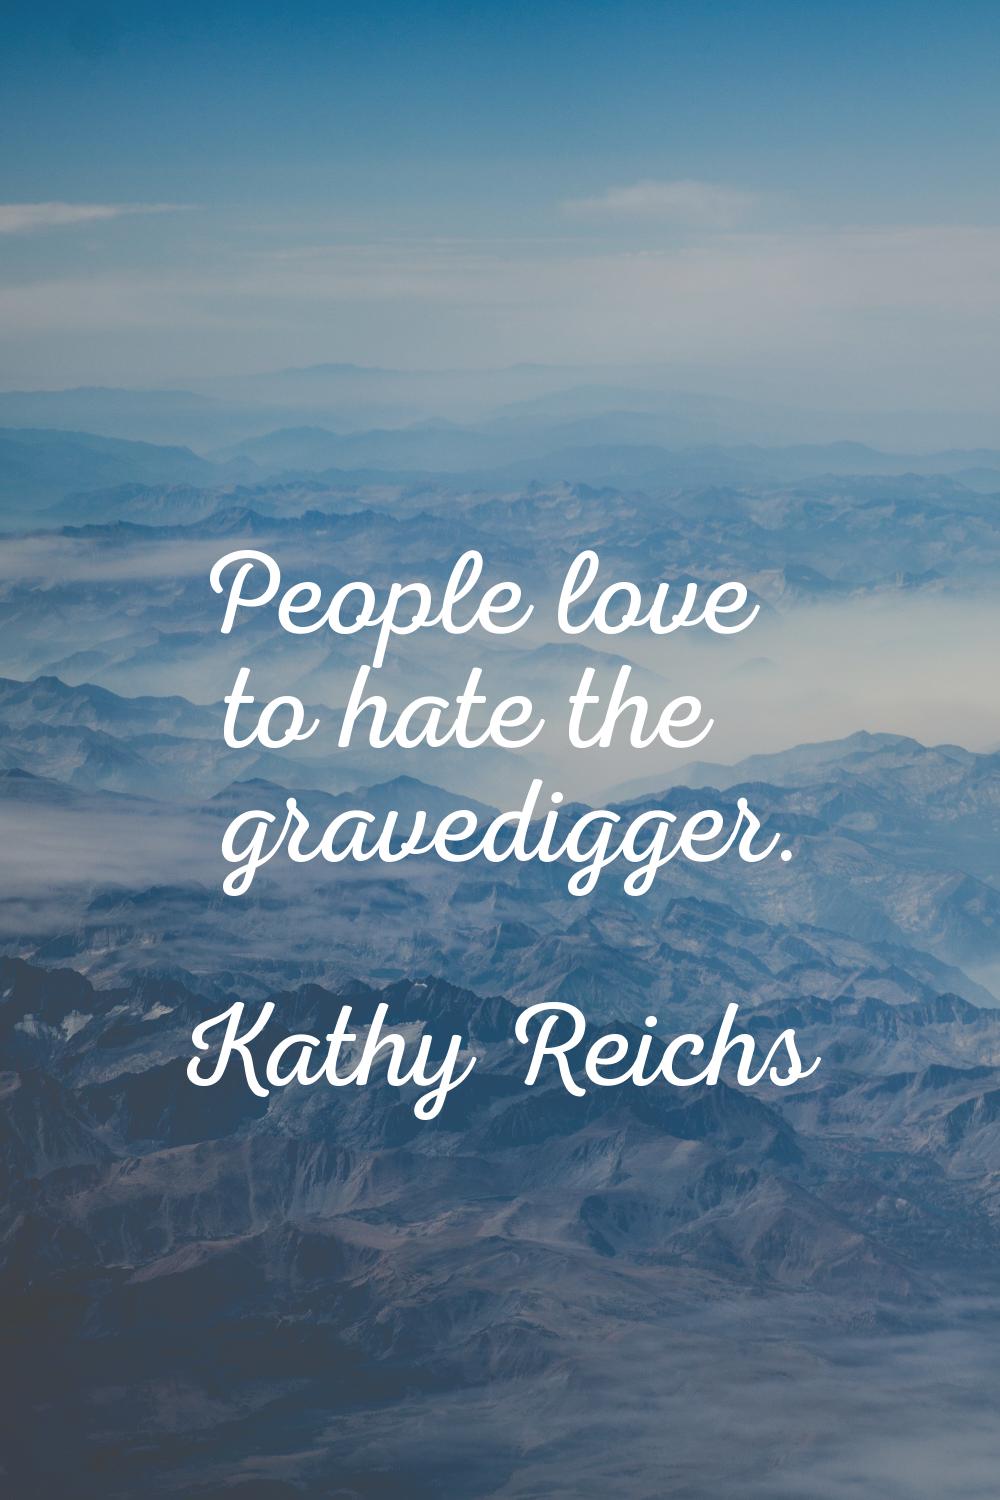 People love to hate the gravedigger.